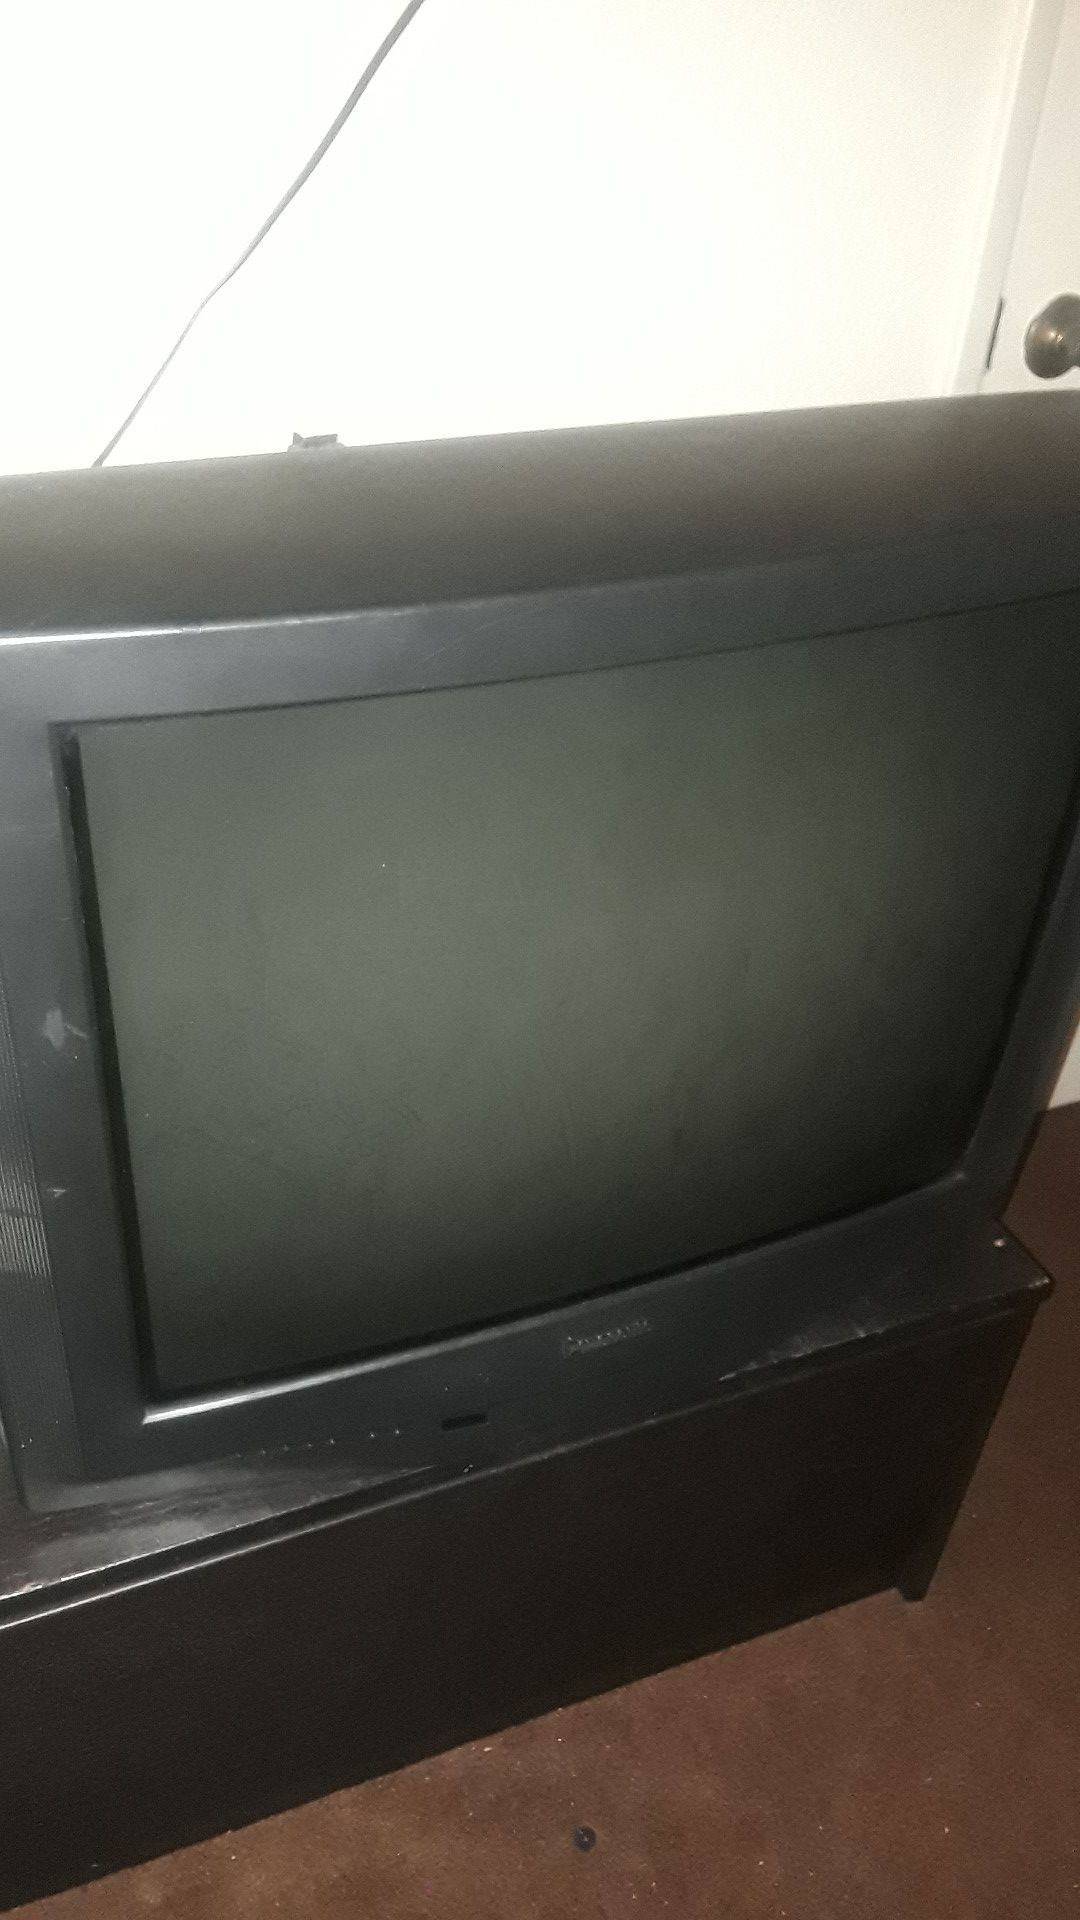 Panasonic 32 inch TV available for pick up $30